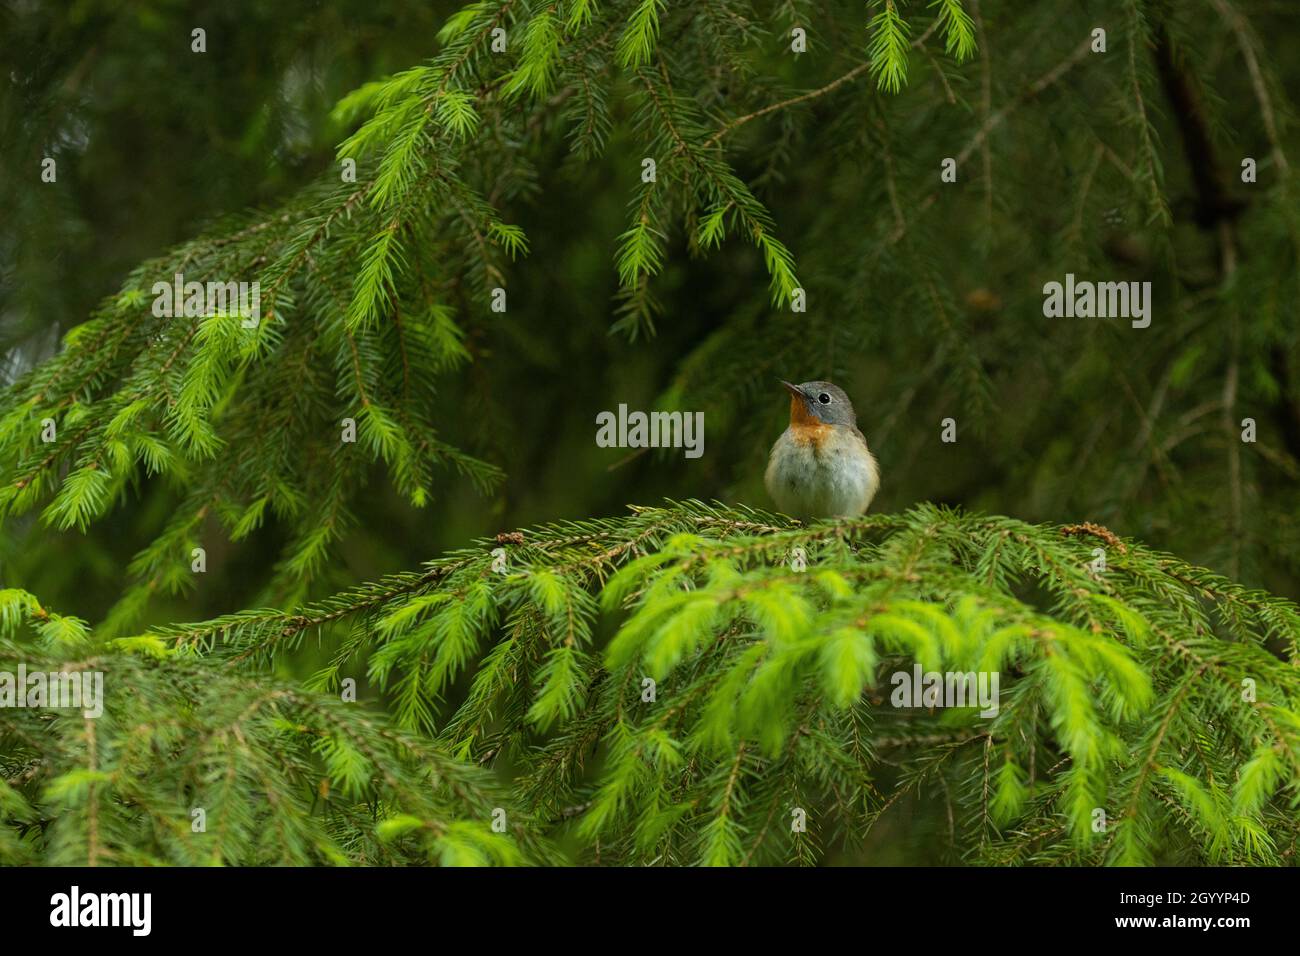 Red-breasted flycatcher, Ficedula parva perched in an old forest in Estonia, Northern Europe. Stock Photo